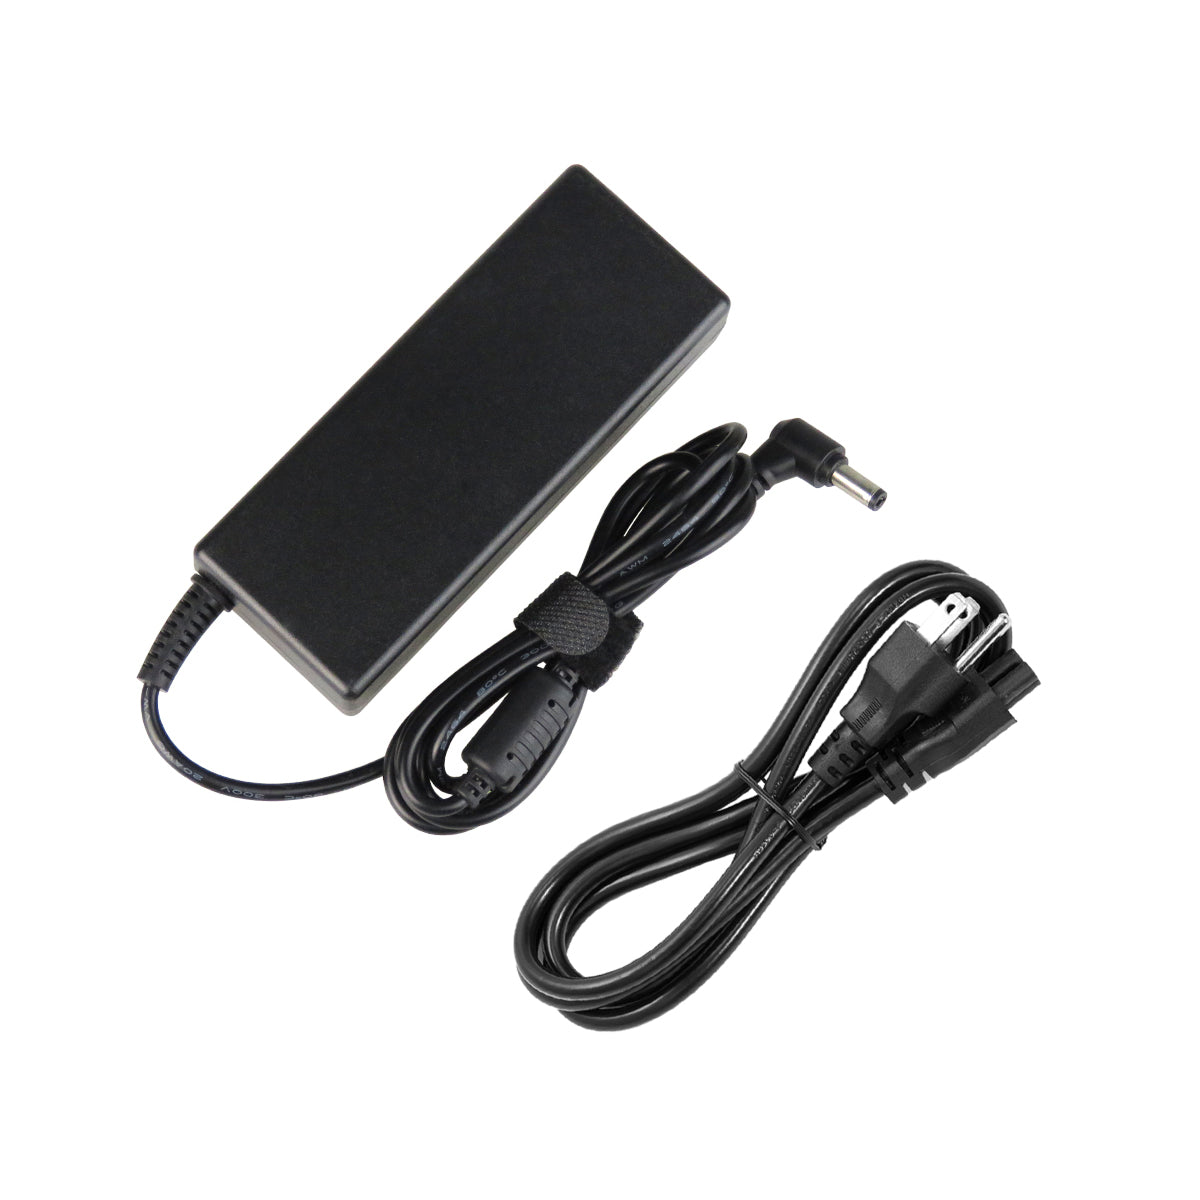 AC Adapter Charger for Gateway M-151 Notebook.